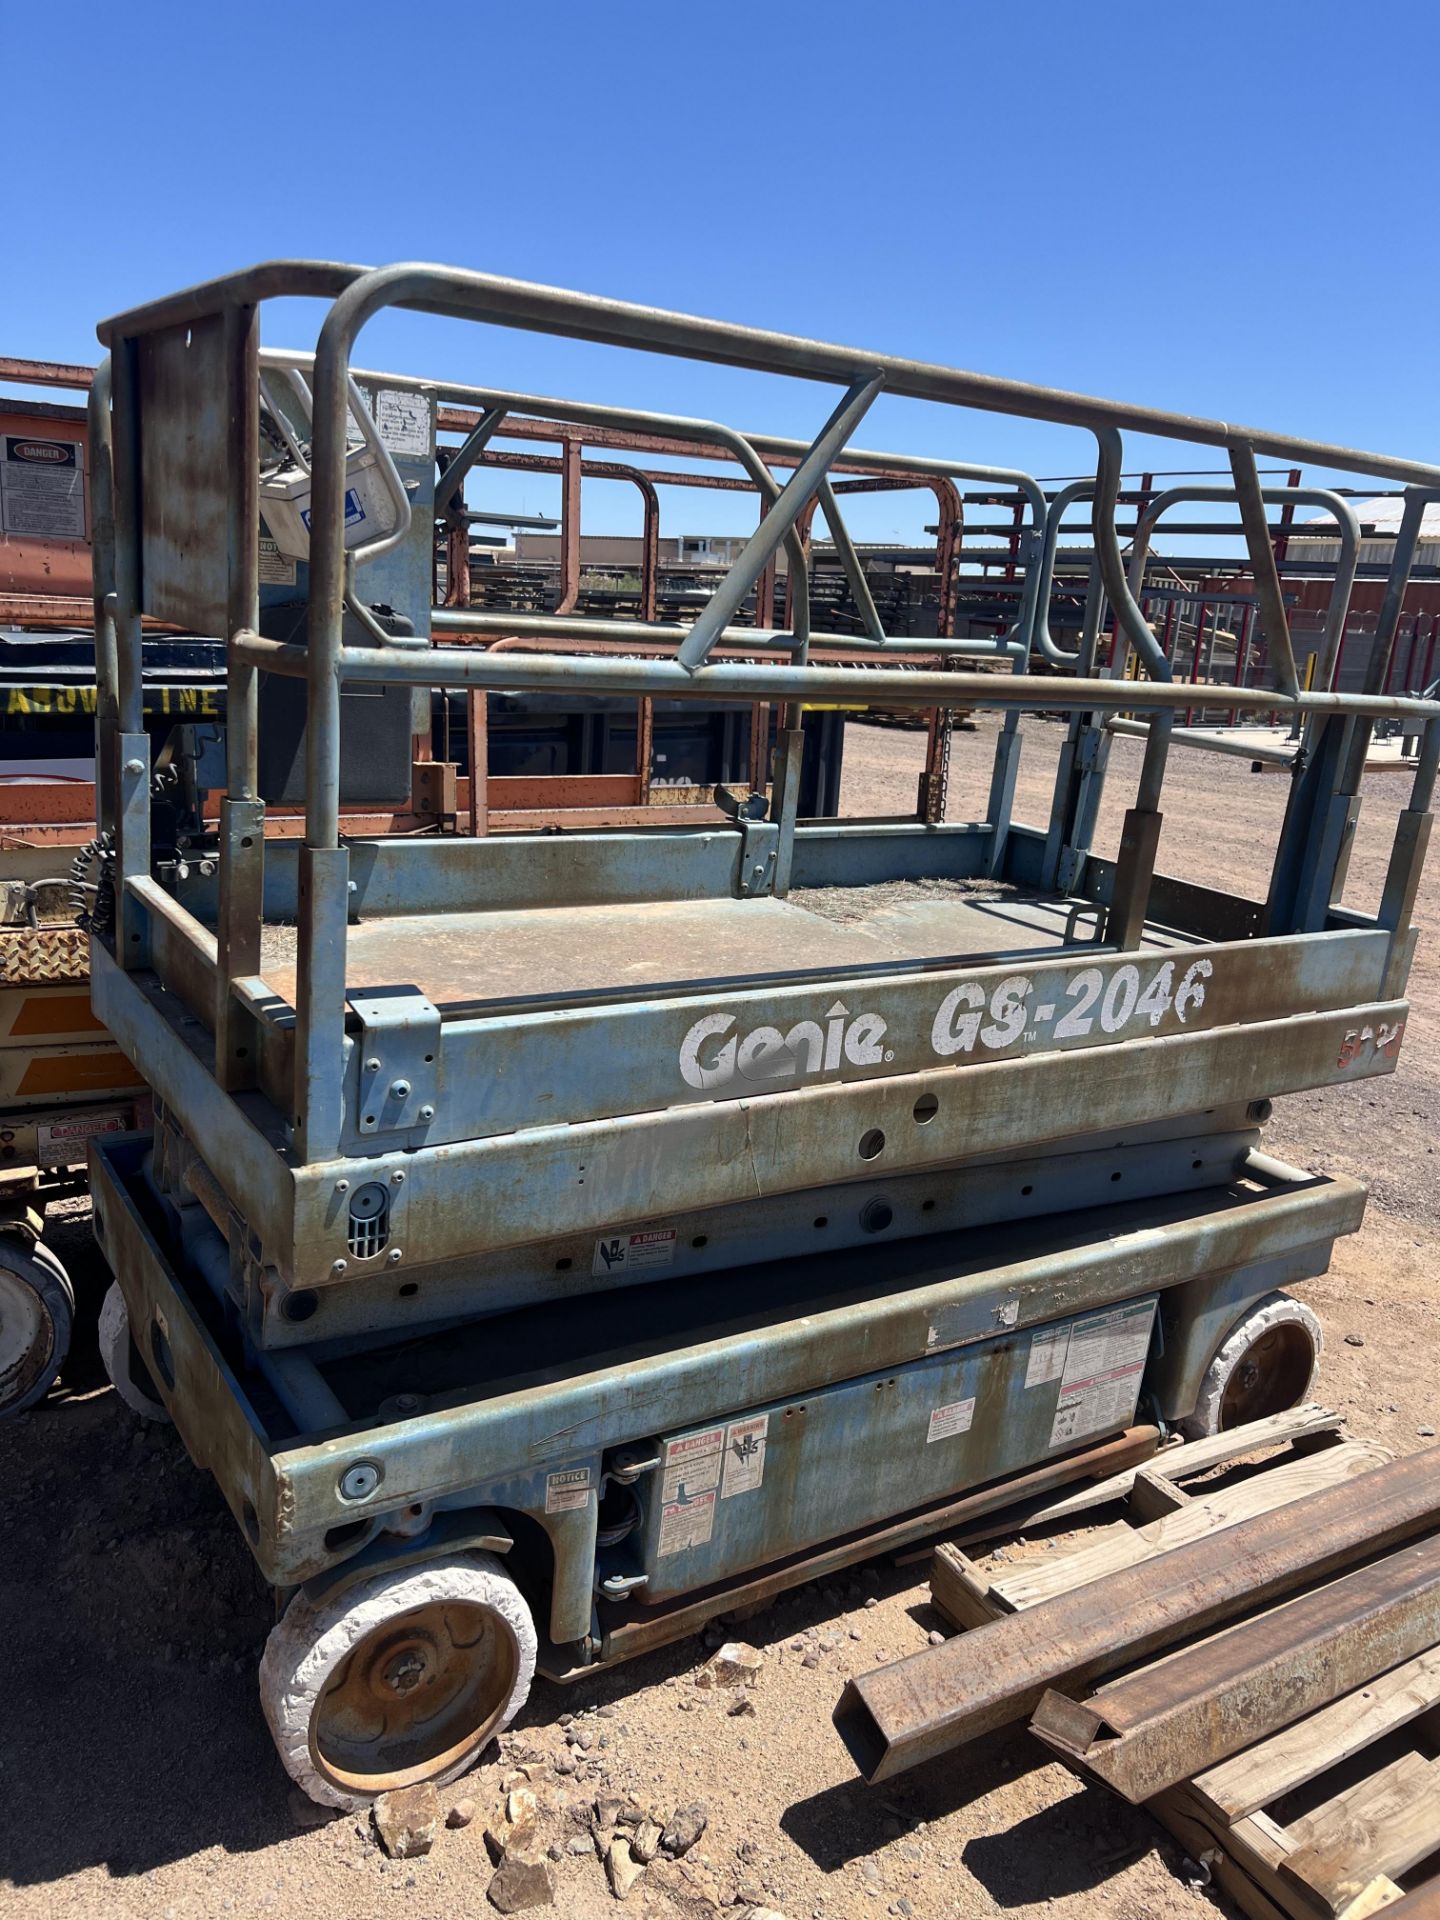 GENIE GS-2046 ELECTRIC SCISSOR LIFT, UNIT IS A WORKING UNIT, BUT WILL REQUIRE NEW BATTERIES.